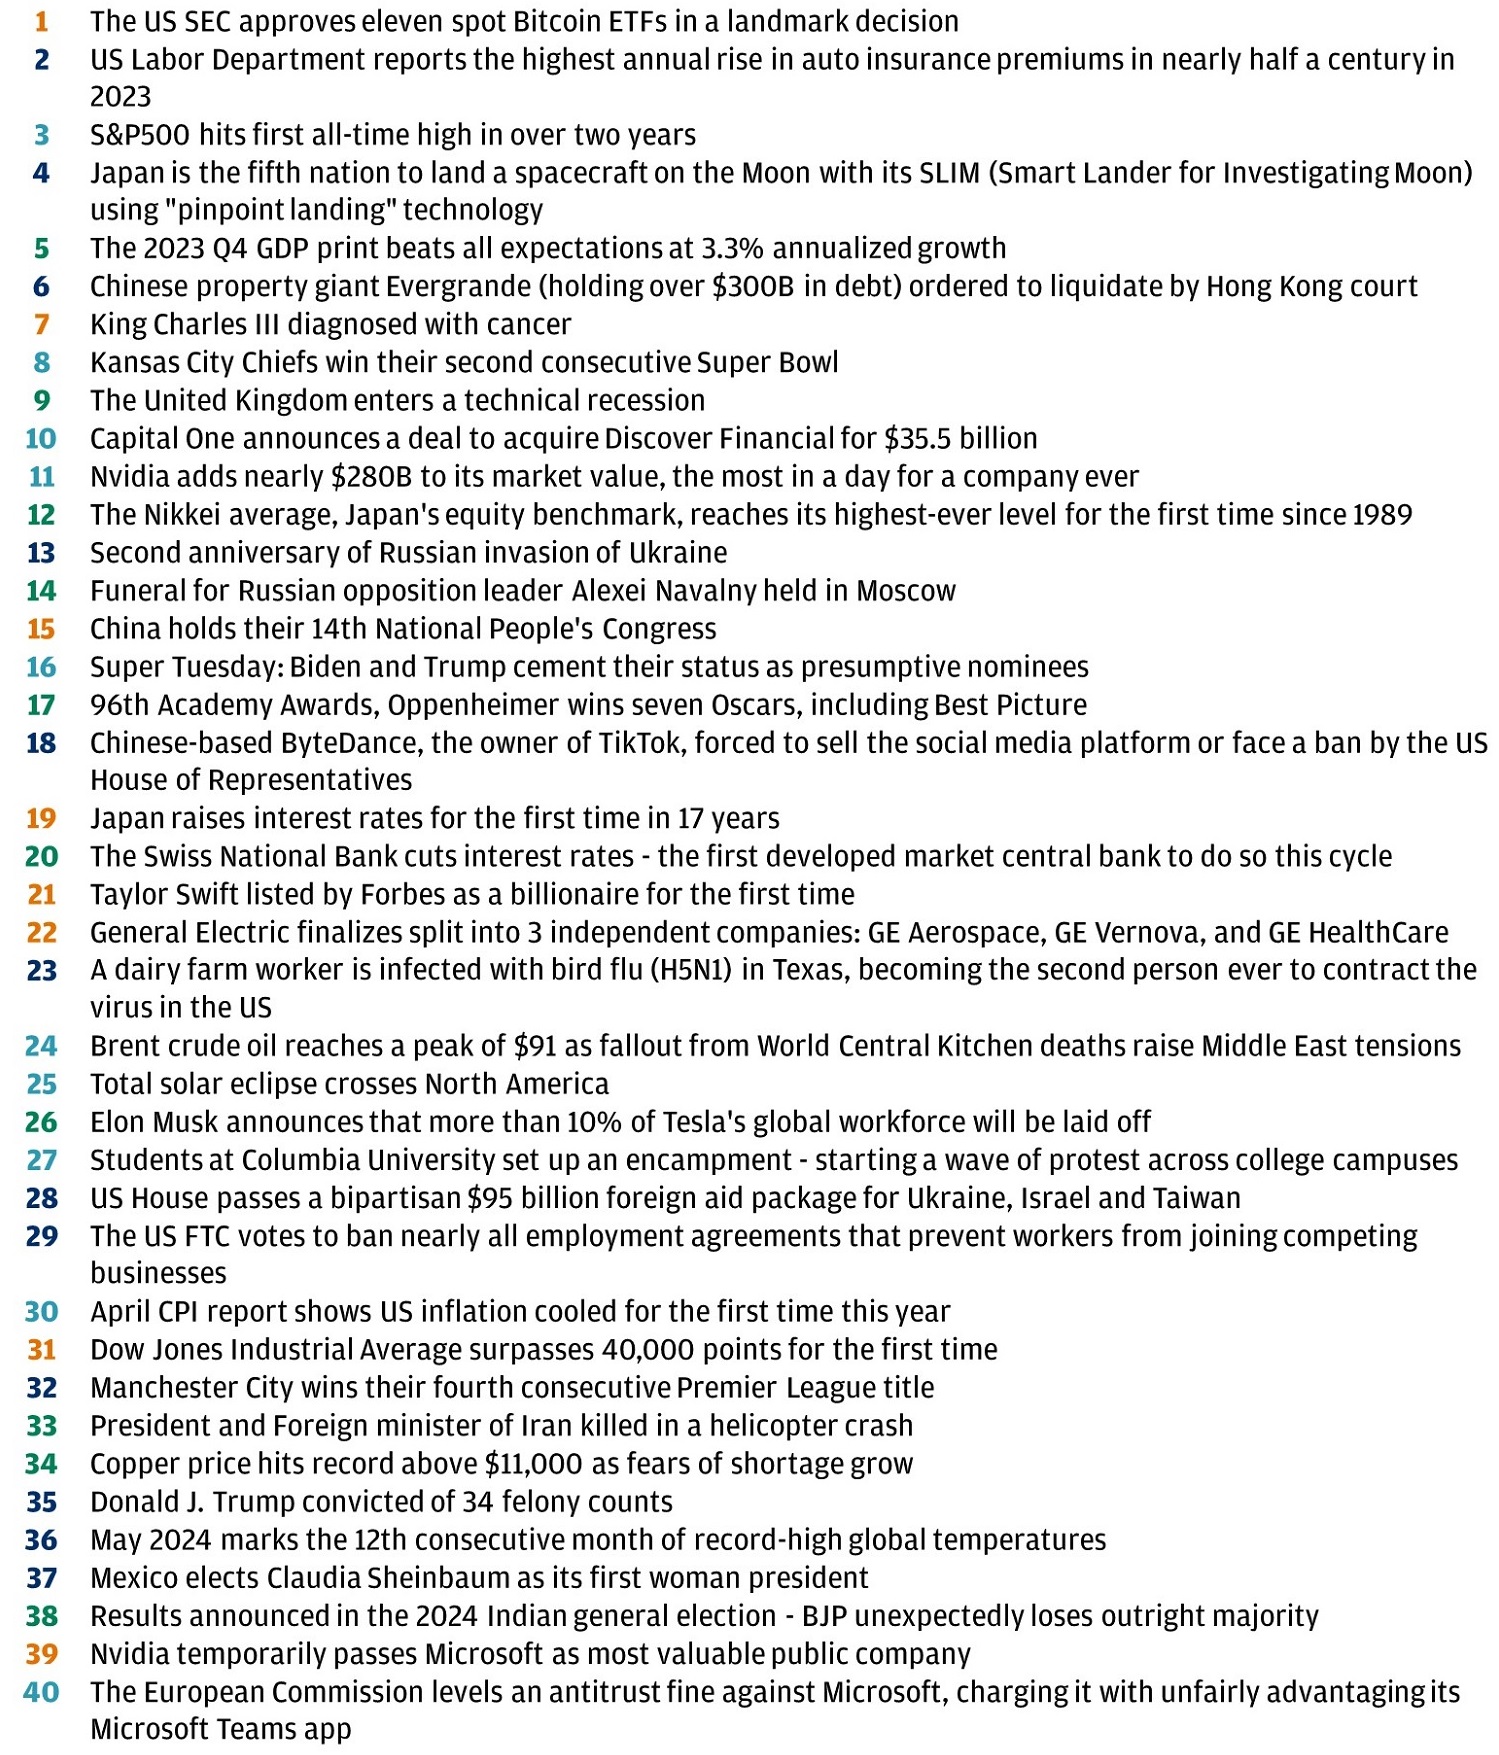 This table lists 40 important events that took place during the first six months of 2024 in chronological order.